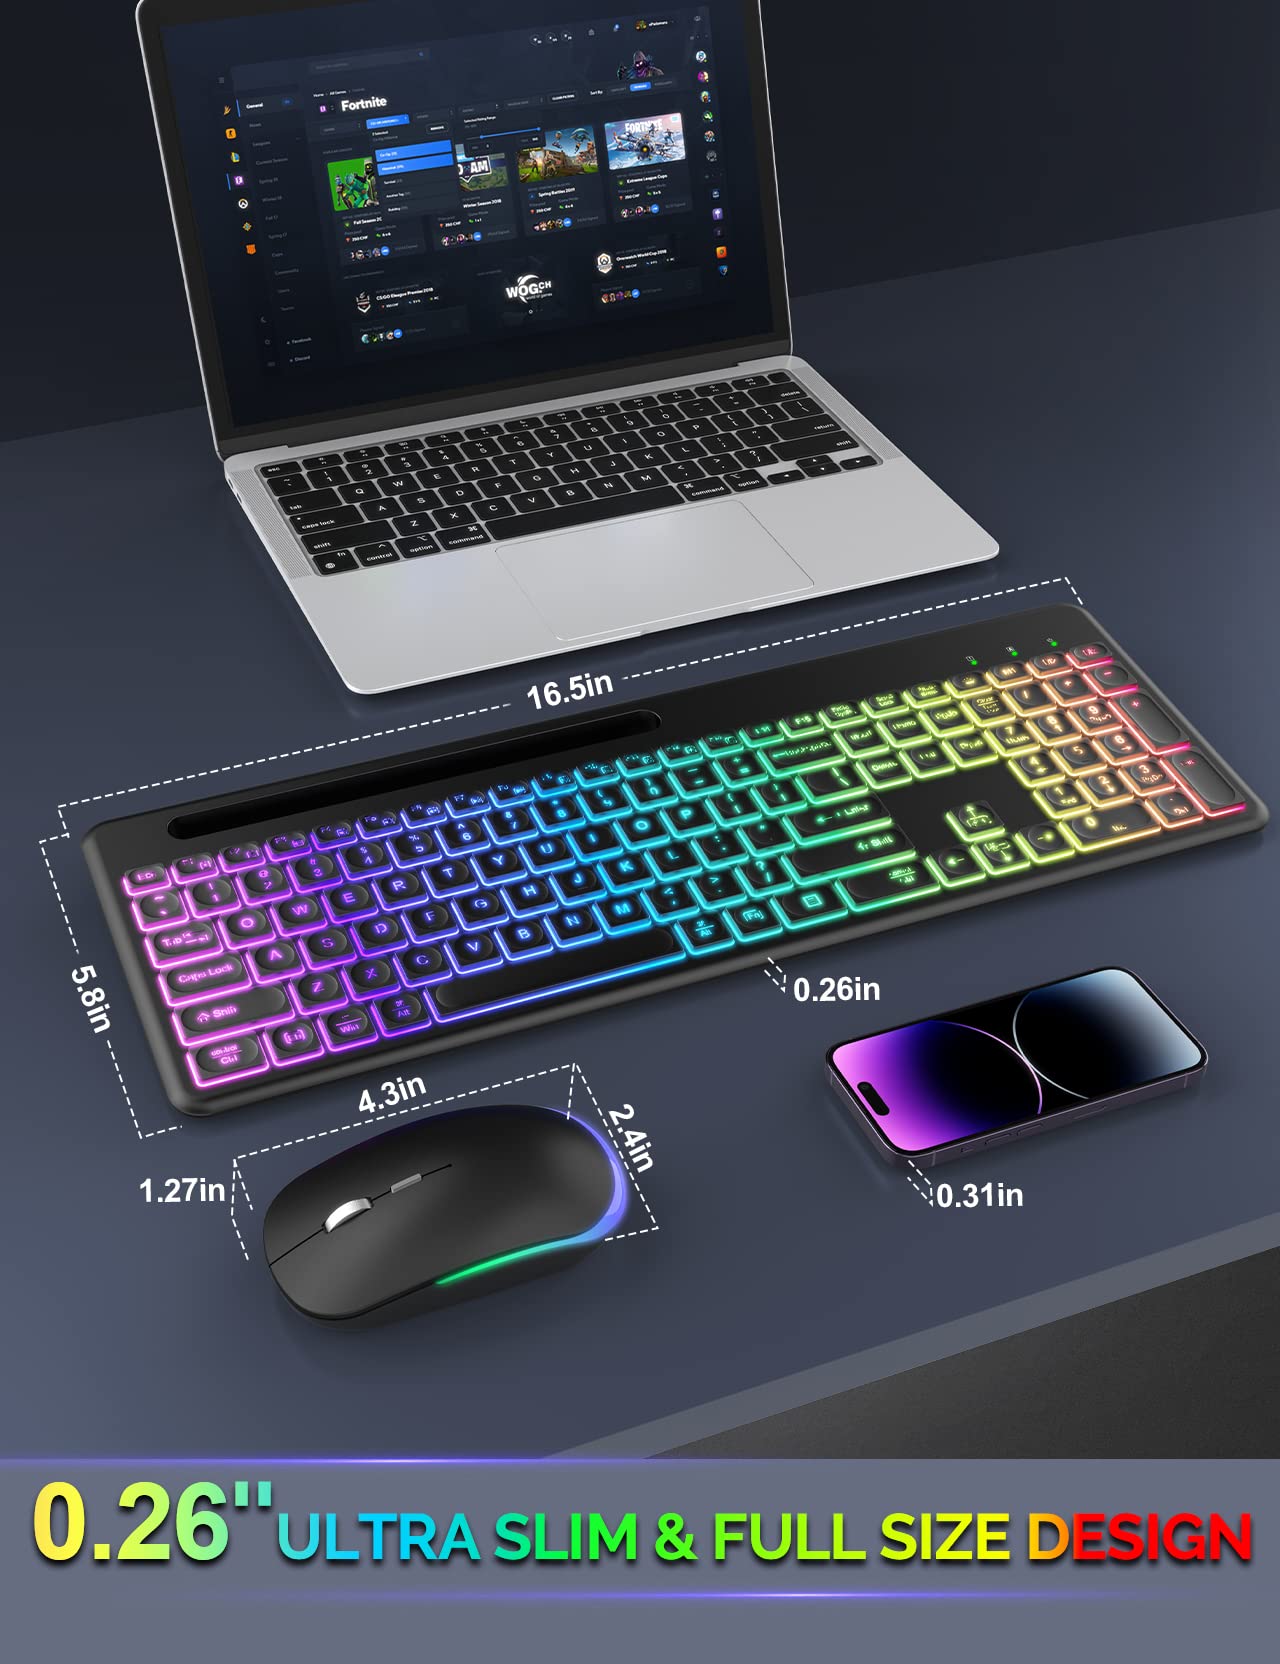 SABLUTE Wireless Keyboard and Mouse Combo